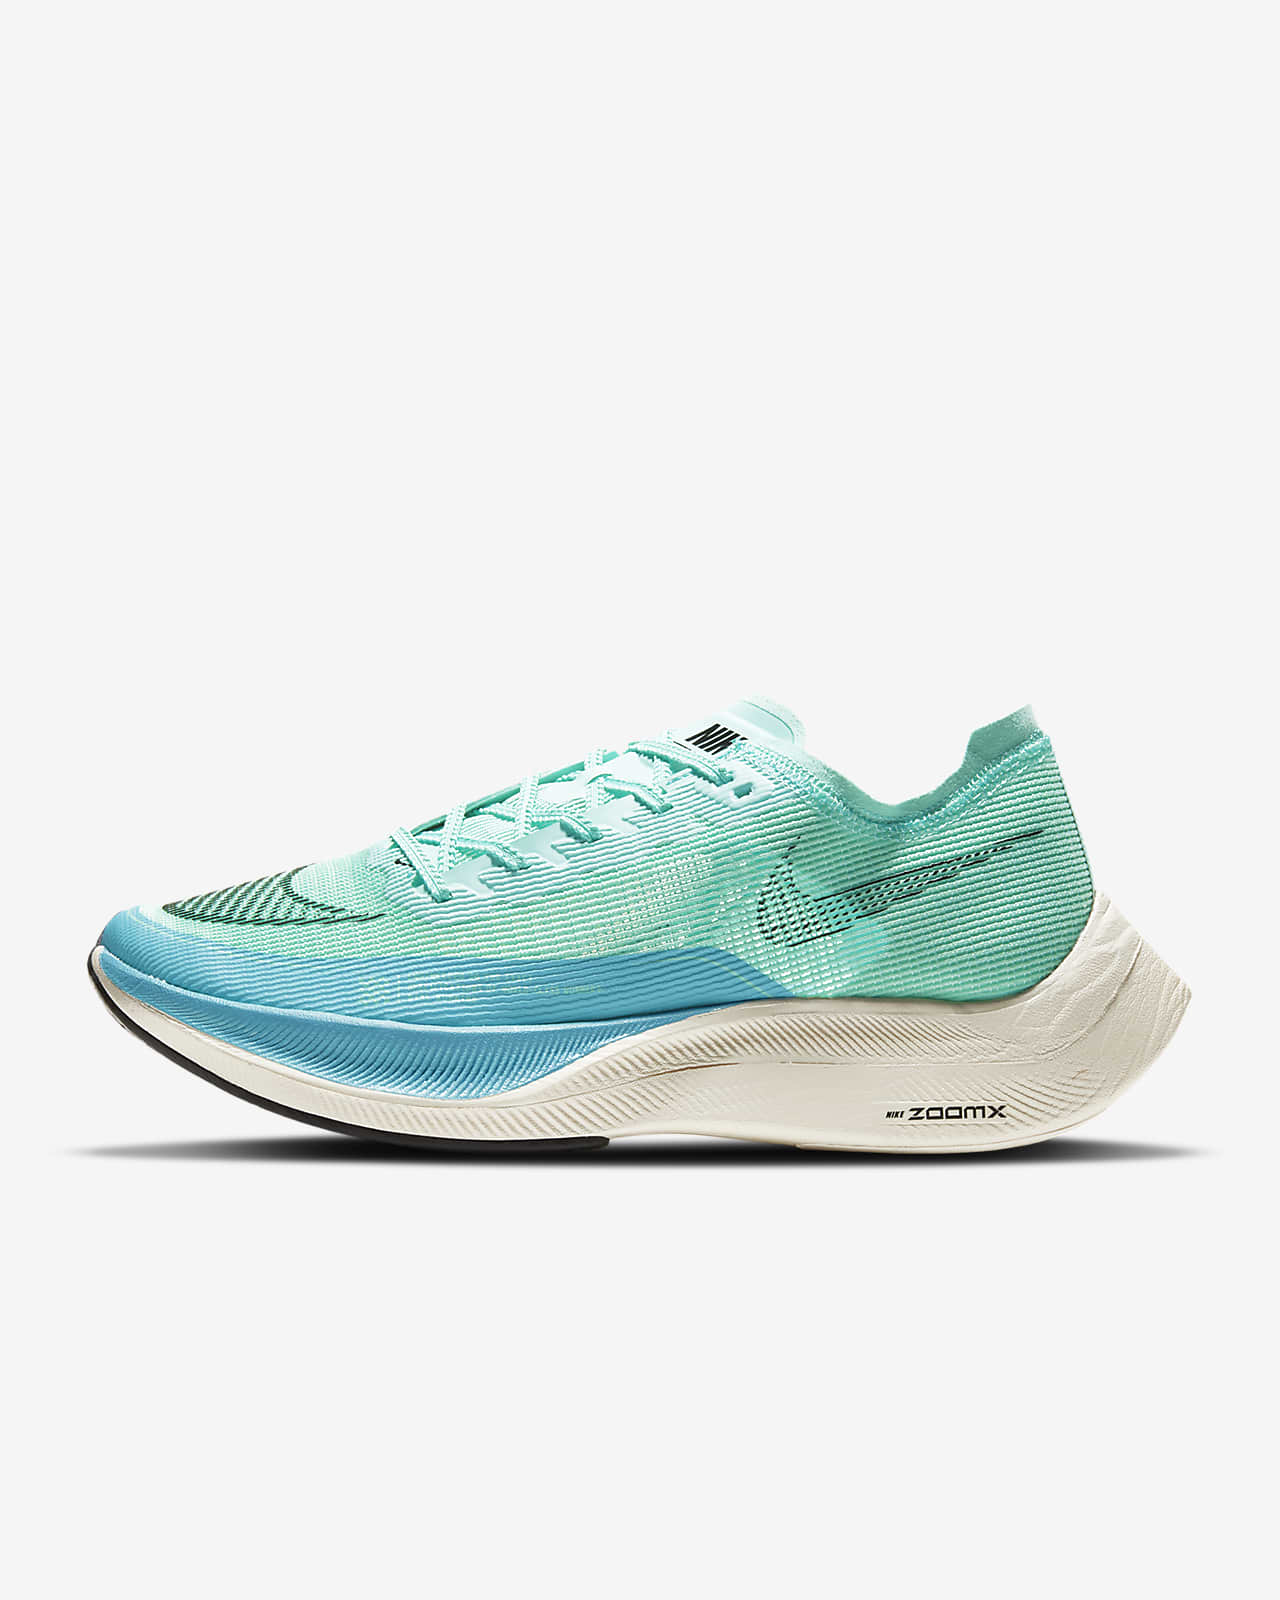 Nike ZoomX Vaporfly Next% 2 Men's Road Racing Shoes. Nike ID